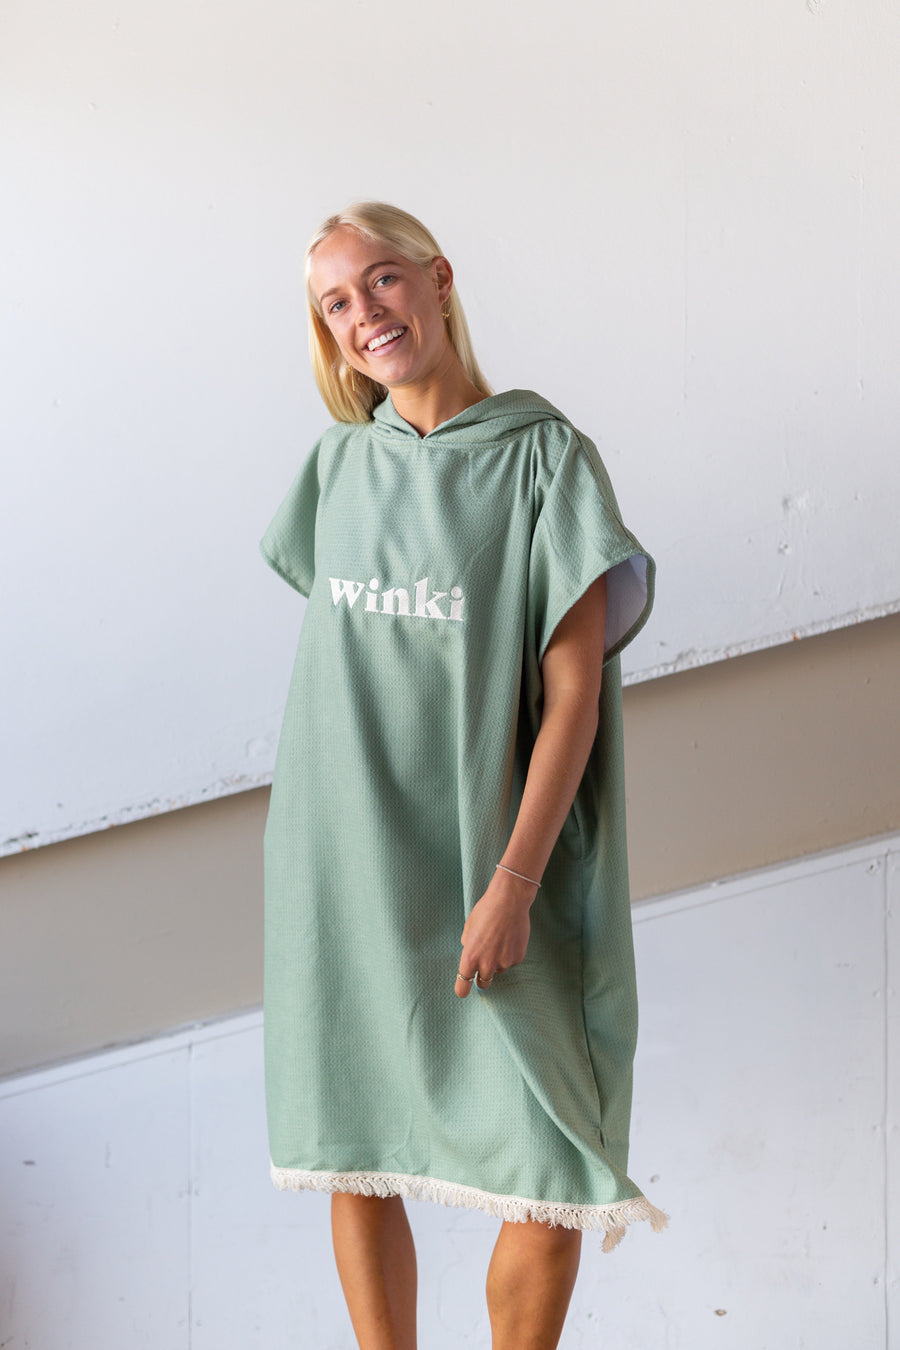 Microfibre Hooded Towel Sage, Ethically Made Beach Accessories, Towels, Surf & Swimwear, Winki Suits